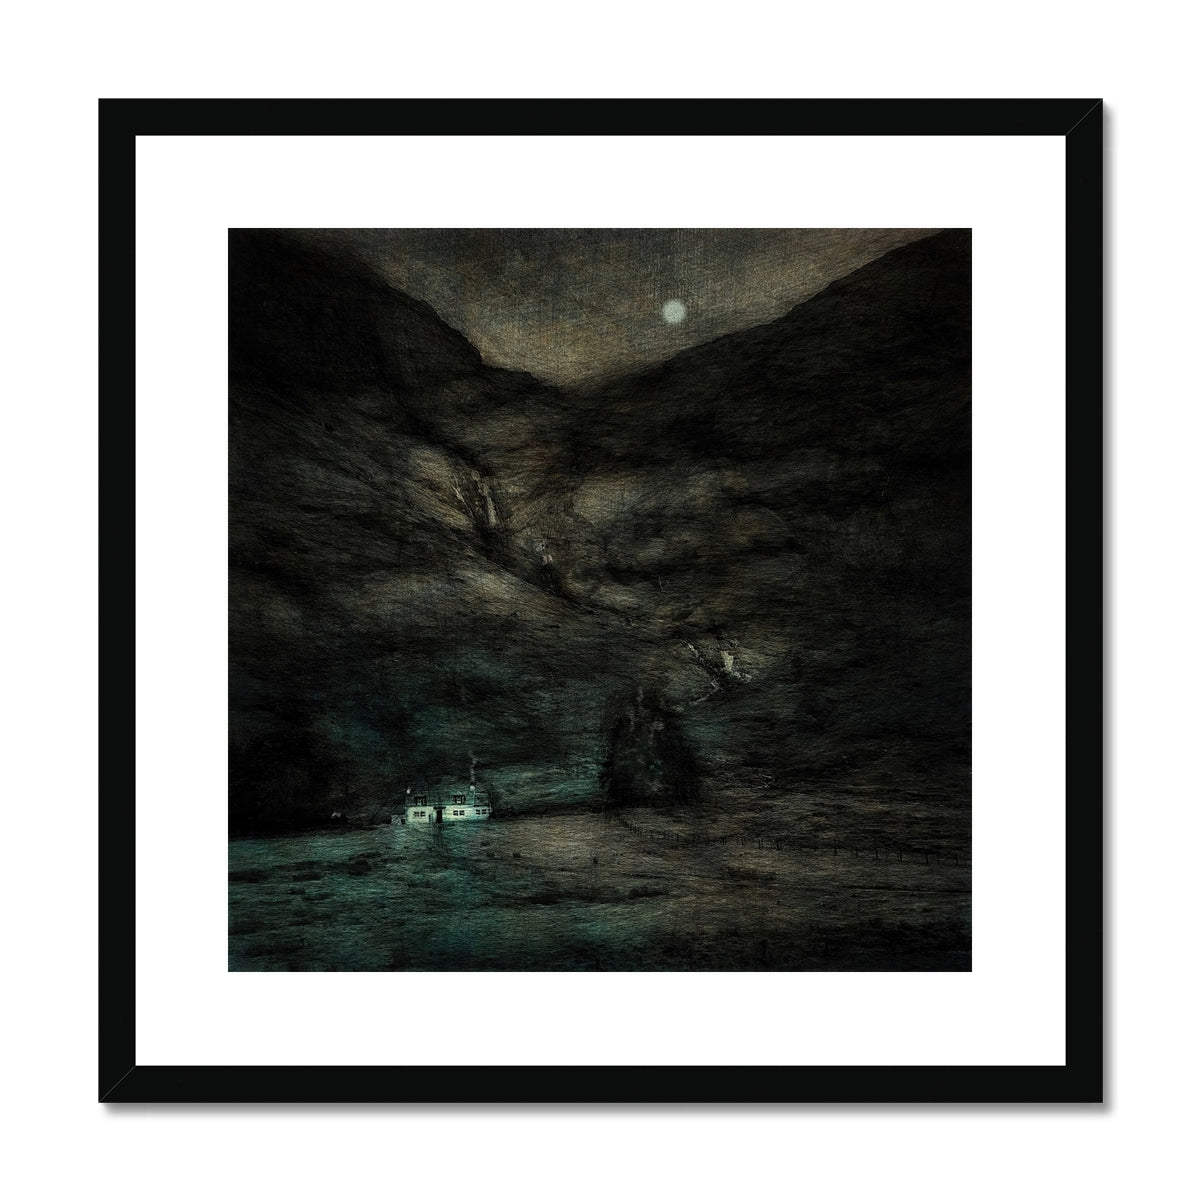 Glencoe Cottage Moonlight Painting | Framed & Mounted Prints From Scotland-Framed & Mounted Prints-Glencoe Art Gallery-20"x20"-Black Frame-Paintings, Prints, Homeware, Art Gifts From Scotland By Scottish Artist Kevin Hunter